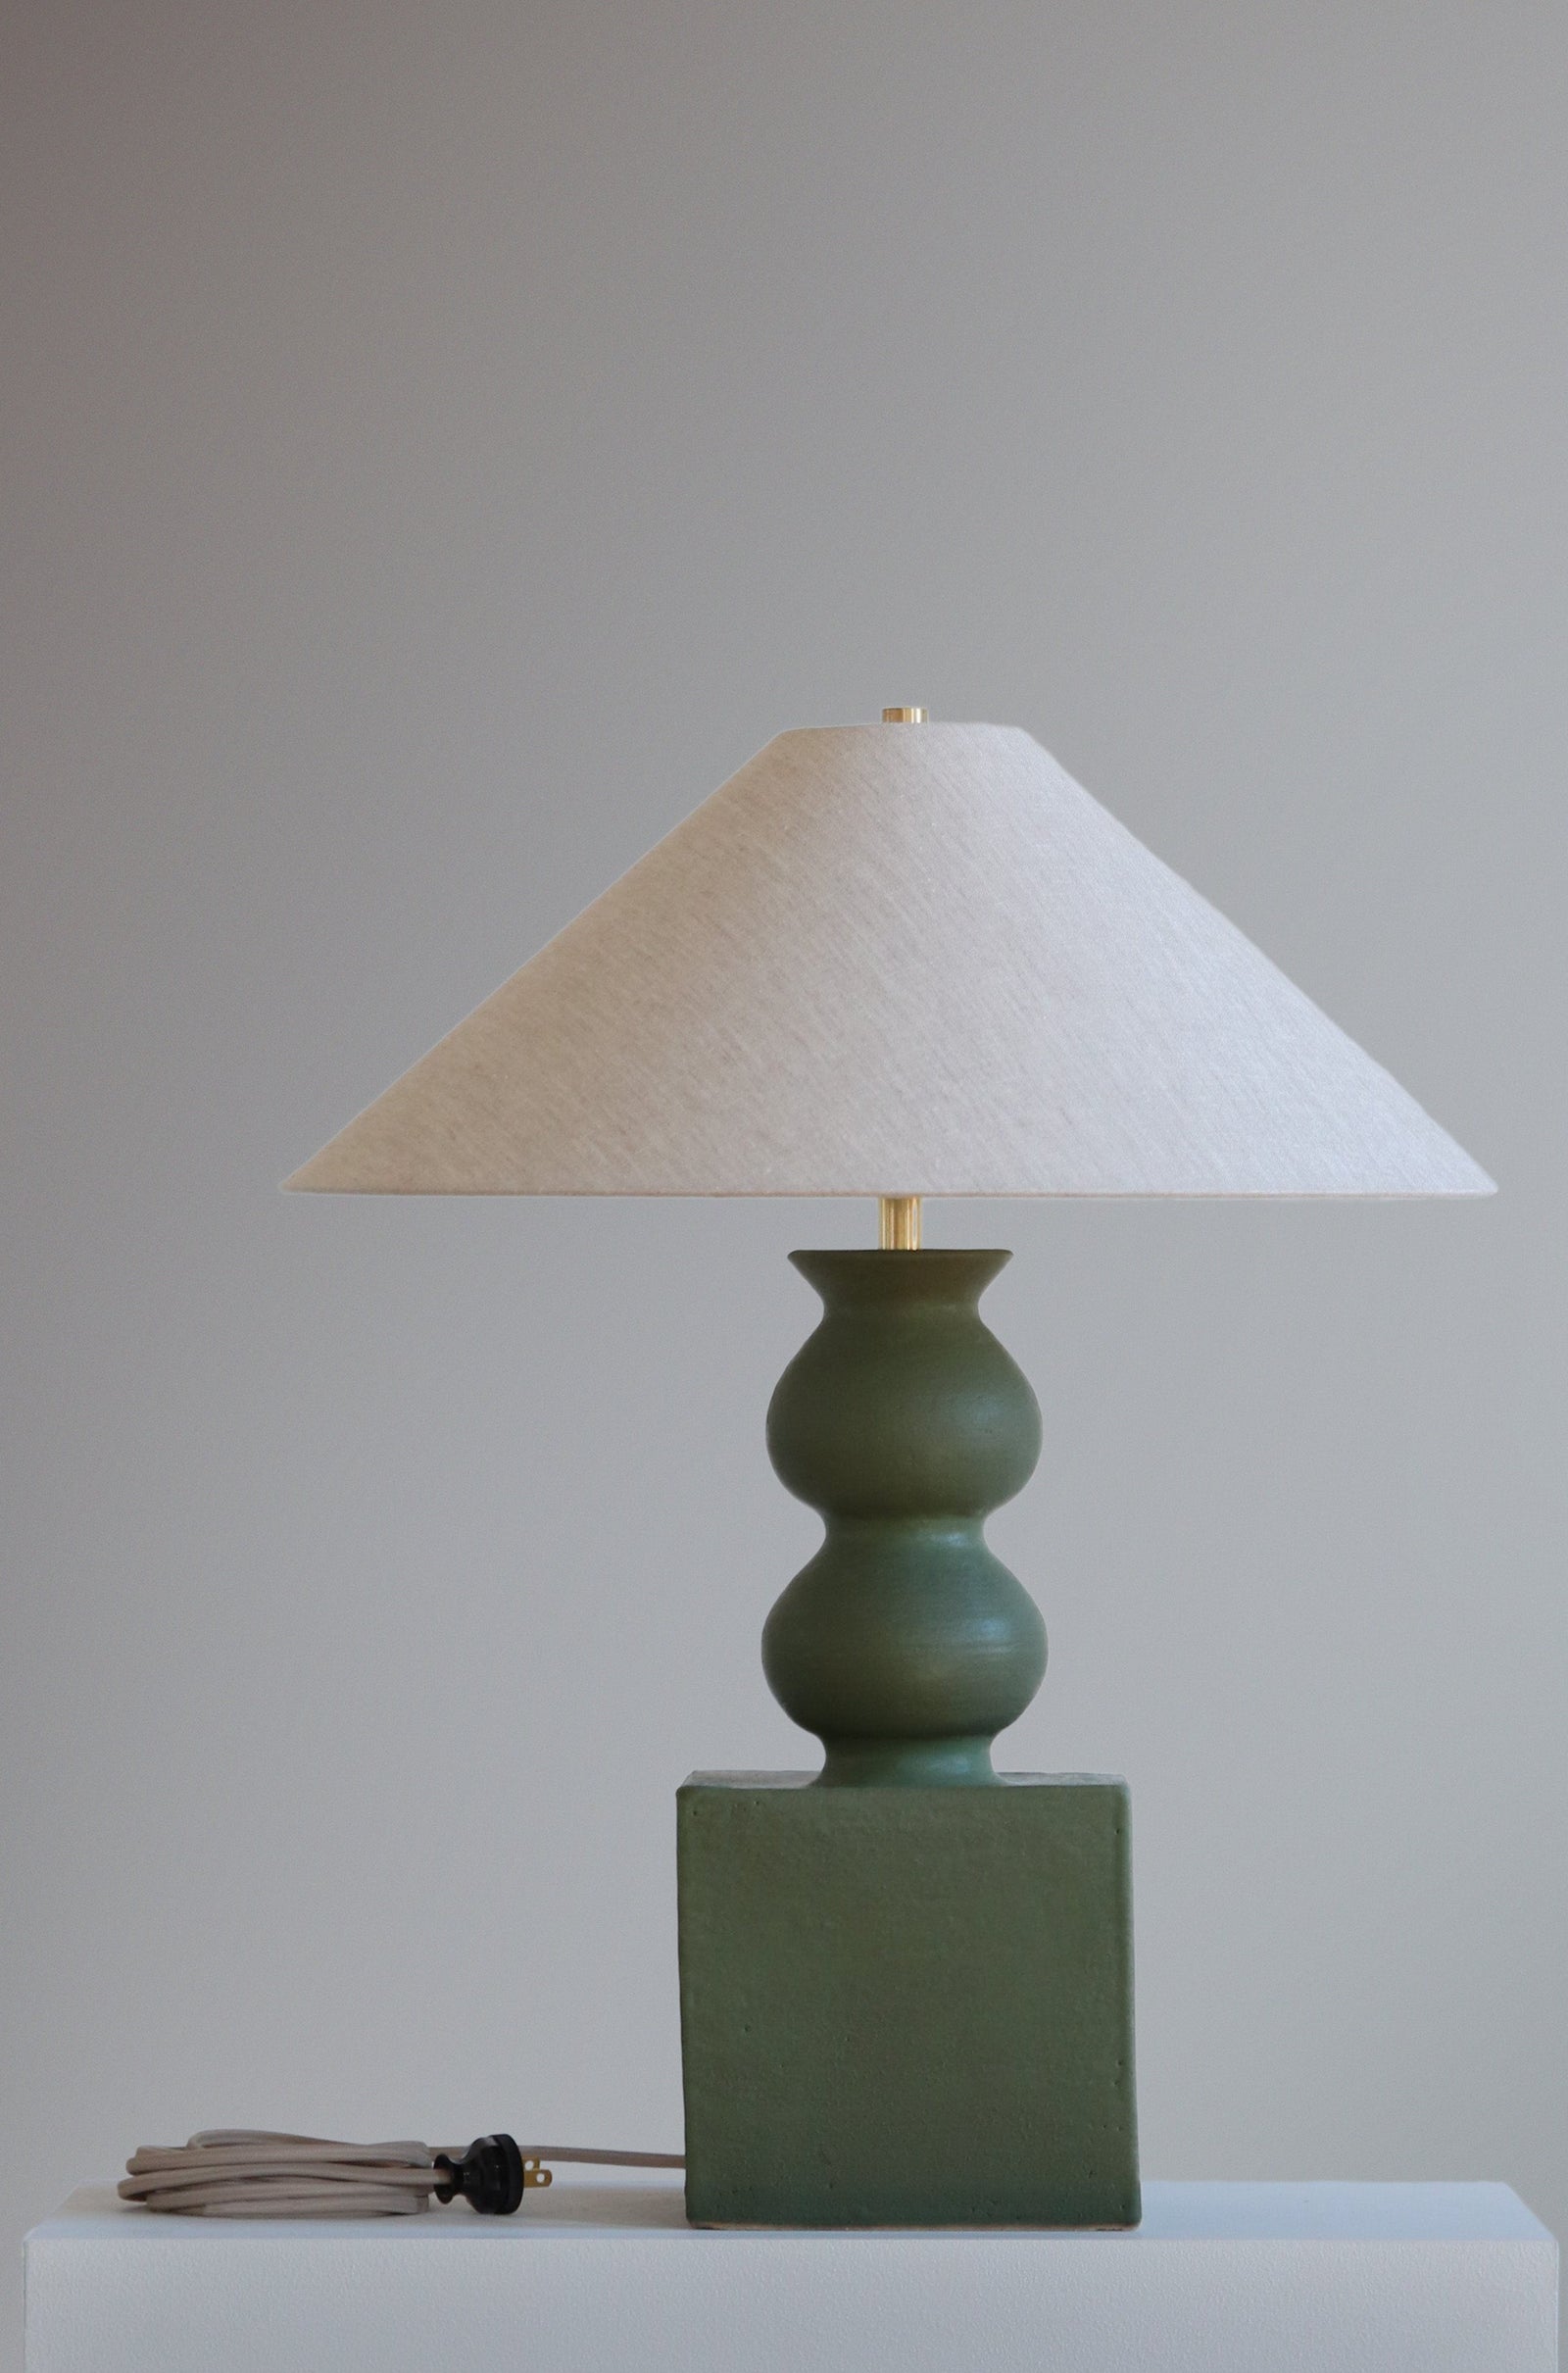 Jacob Lamp in Ivy with oatmeal linen shade